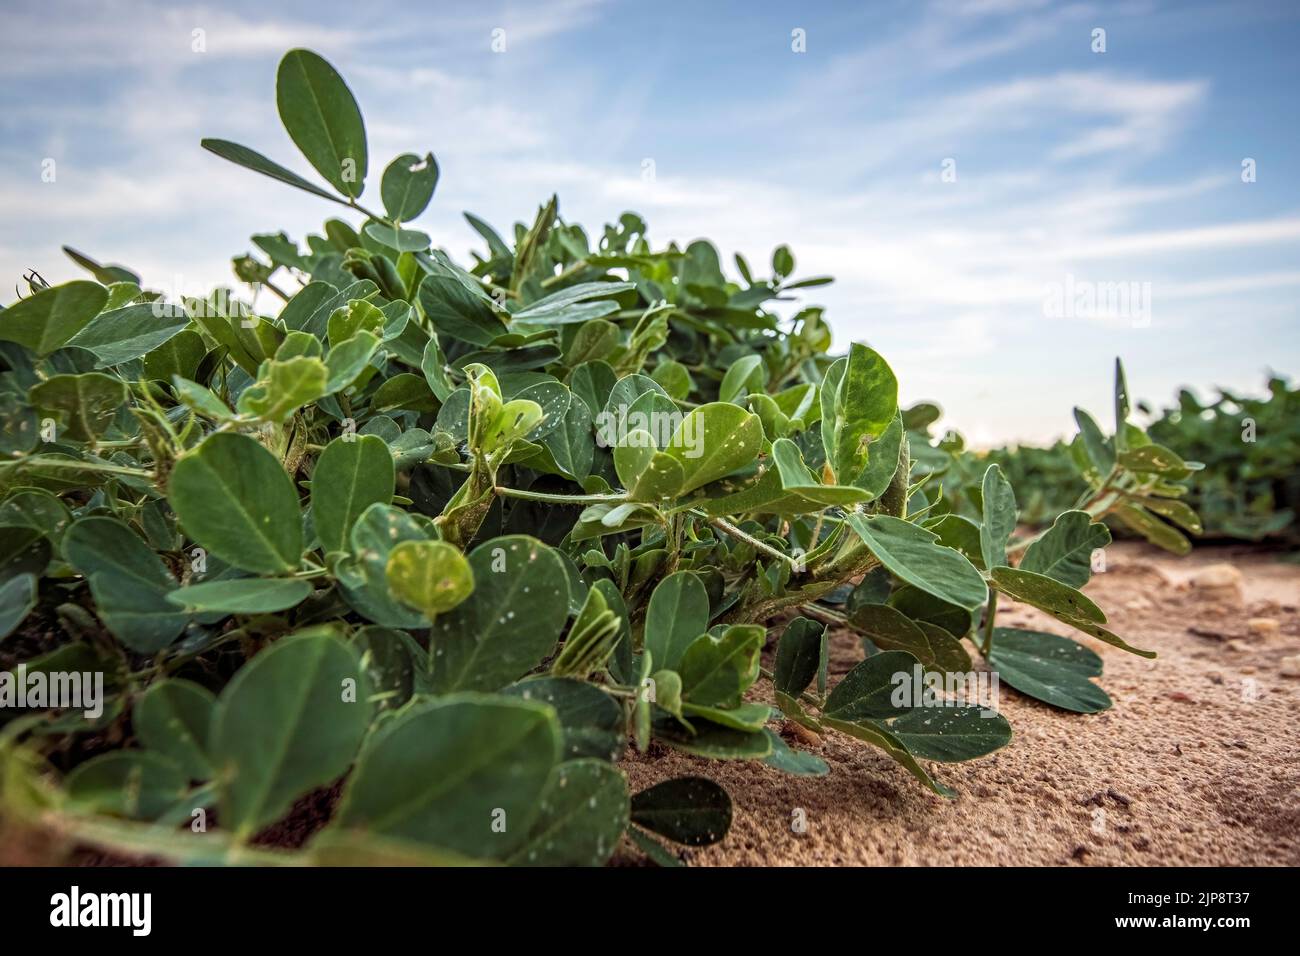 Close up low angle view of peanut plants (Arachis hypogaea) growing in a field in south Georgia with negative space. Stock Photo